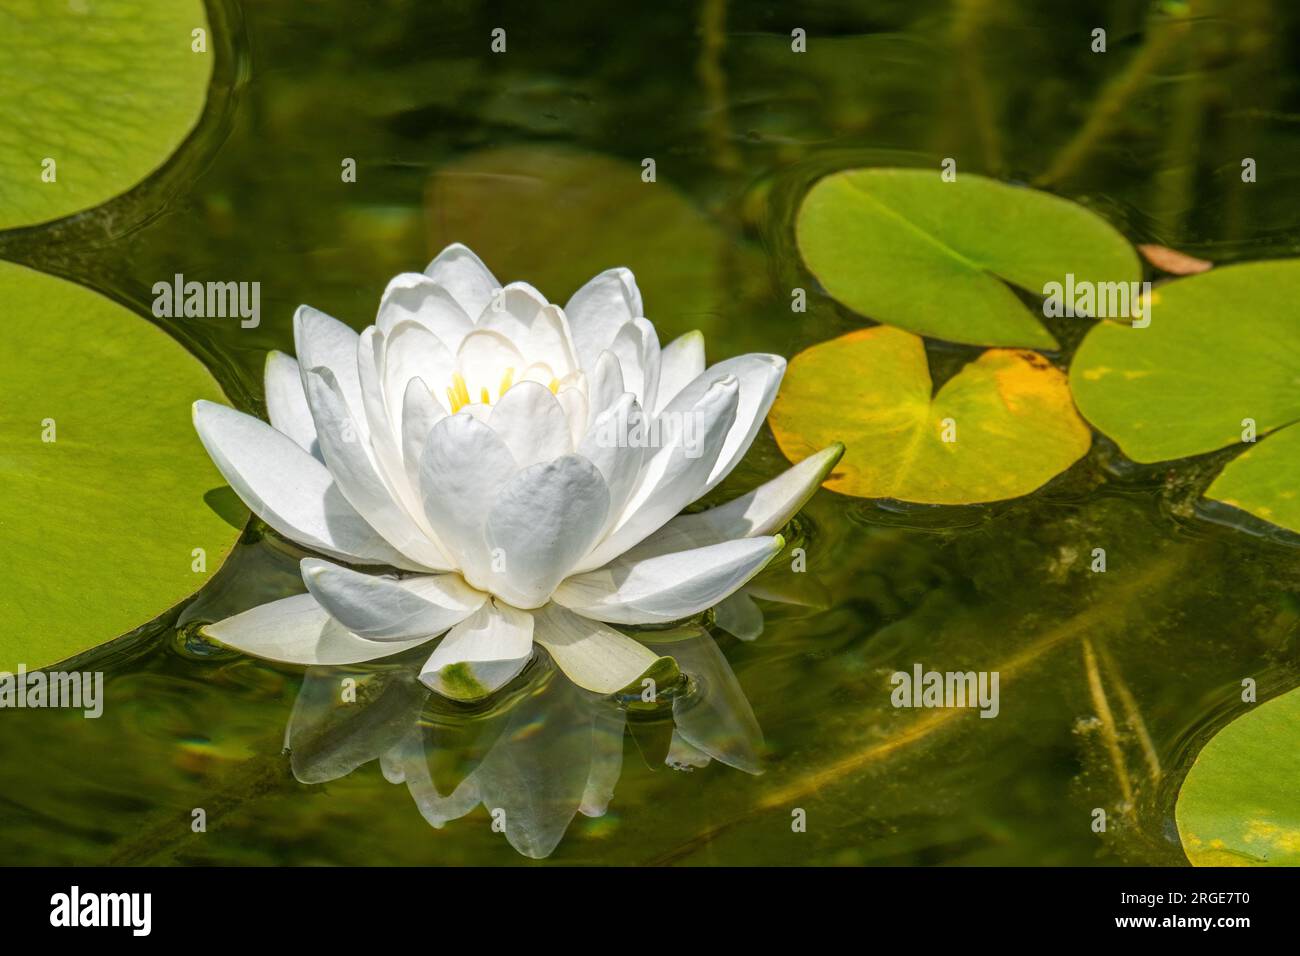 Waterlilies, family Nymphaeaceae, is a freshwater flowering plant found in tropical and temperate climates. Stock Photo